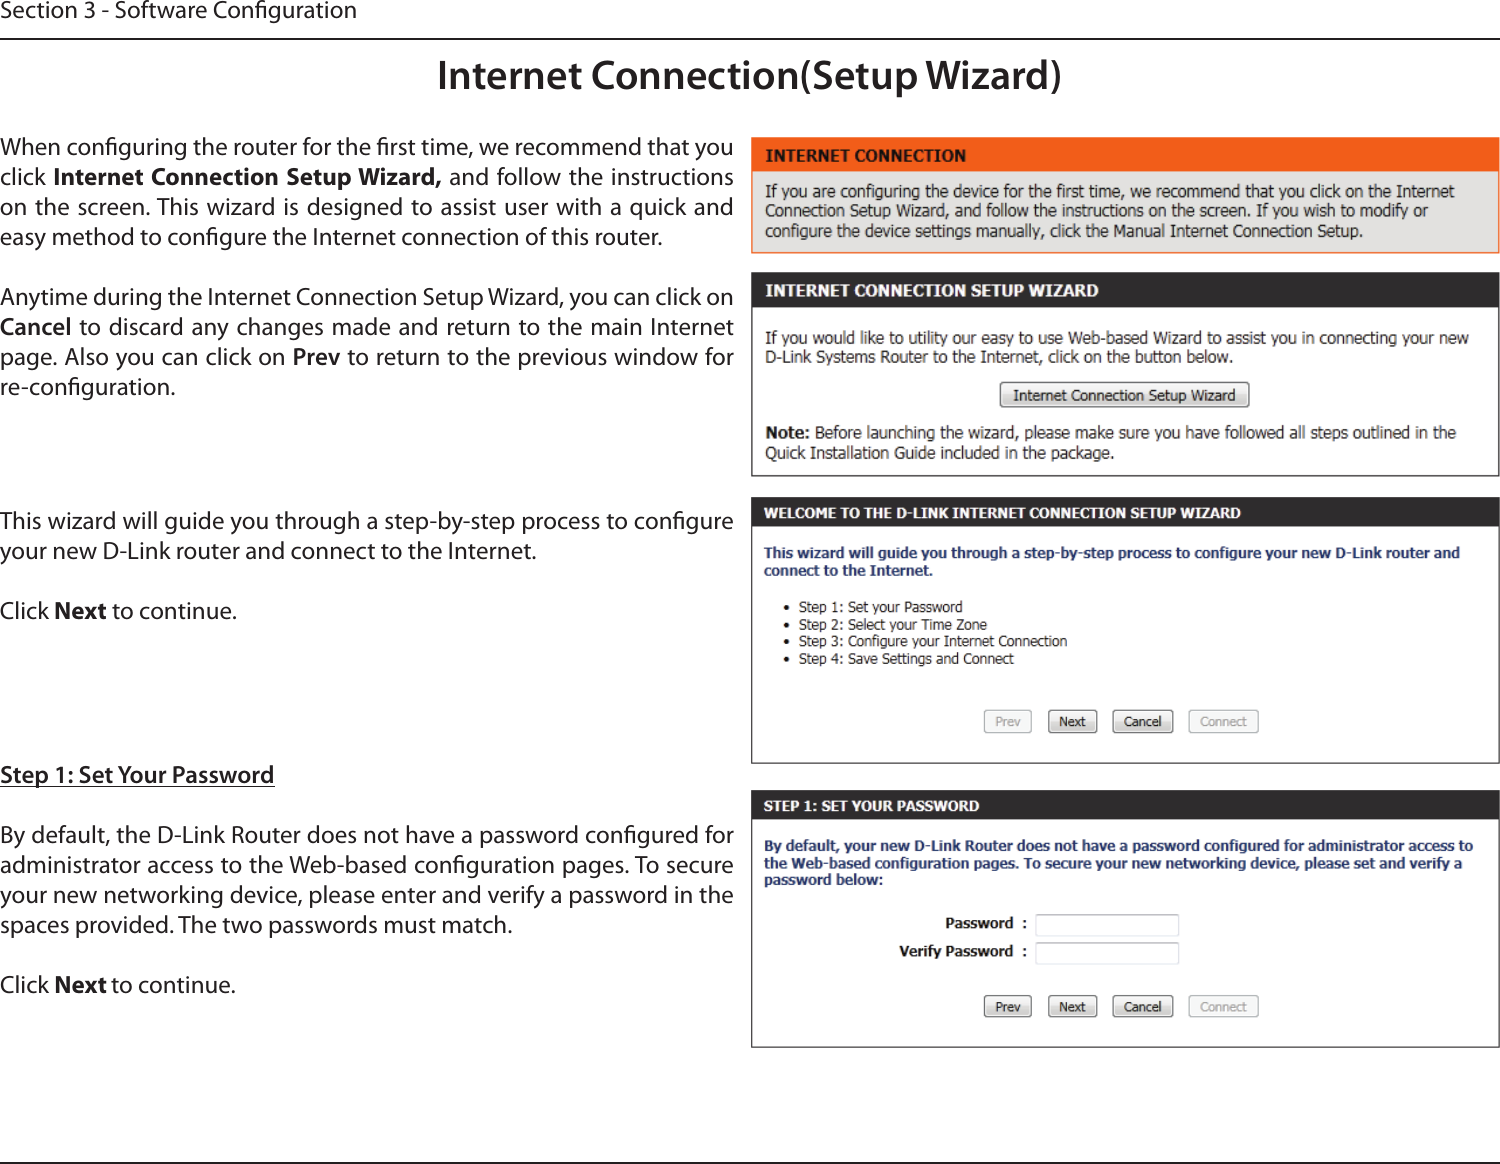 Section 3 - Software CongurationInternet Connection(Setup Wizard)When conguring the router for the rst time, we recommend that you click Internet Connection Setup Wizard, and follow the instructions on the screen. This wizard is designed to assist user with a quick and easy method to congure the Internet connection of this router.Anytime during the Internet Connection Setup Wizard, you can click on Cancel to discard any changes made and return to the main Internet page. Also you can click on Prev to return to the previous window for re-conguration.This wizard will guide you through a step-by-step process to congure your new D-Link router and connect to the Internet. Click Next to continue.Step 1: Set Your PasswordBy default, the D-Link Router does not have a password congured for administrator access to the Web-based conguration pages. To secure your new networking device, please enter and verify a password in the spaces provided. The two passwords must match.Click Next to continue.